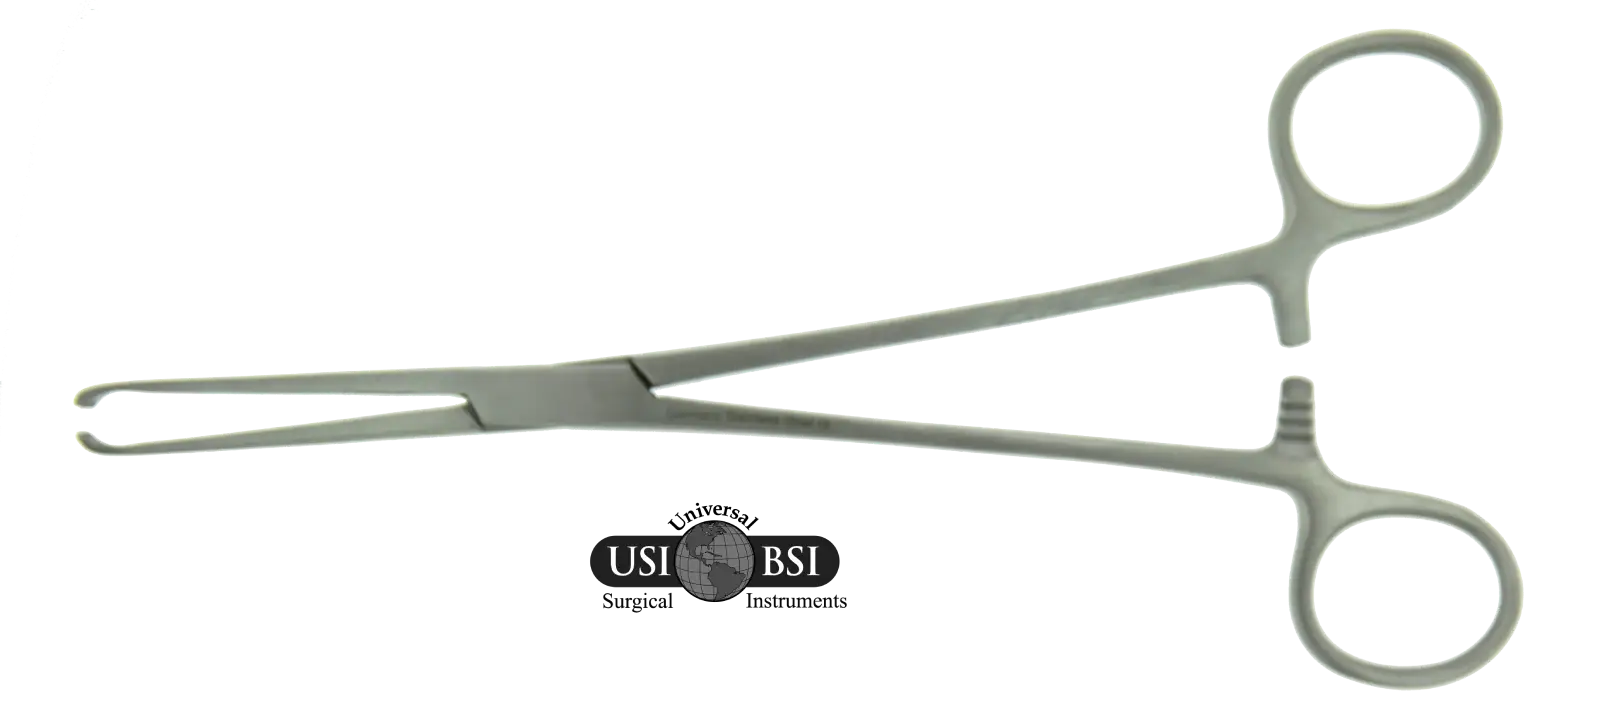 A pair of scissors with the word " usi bsi ".